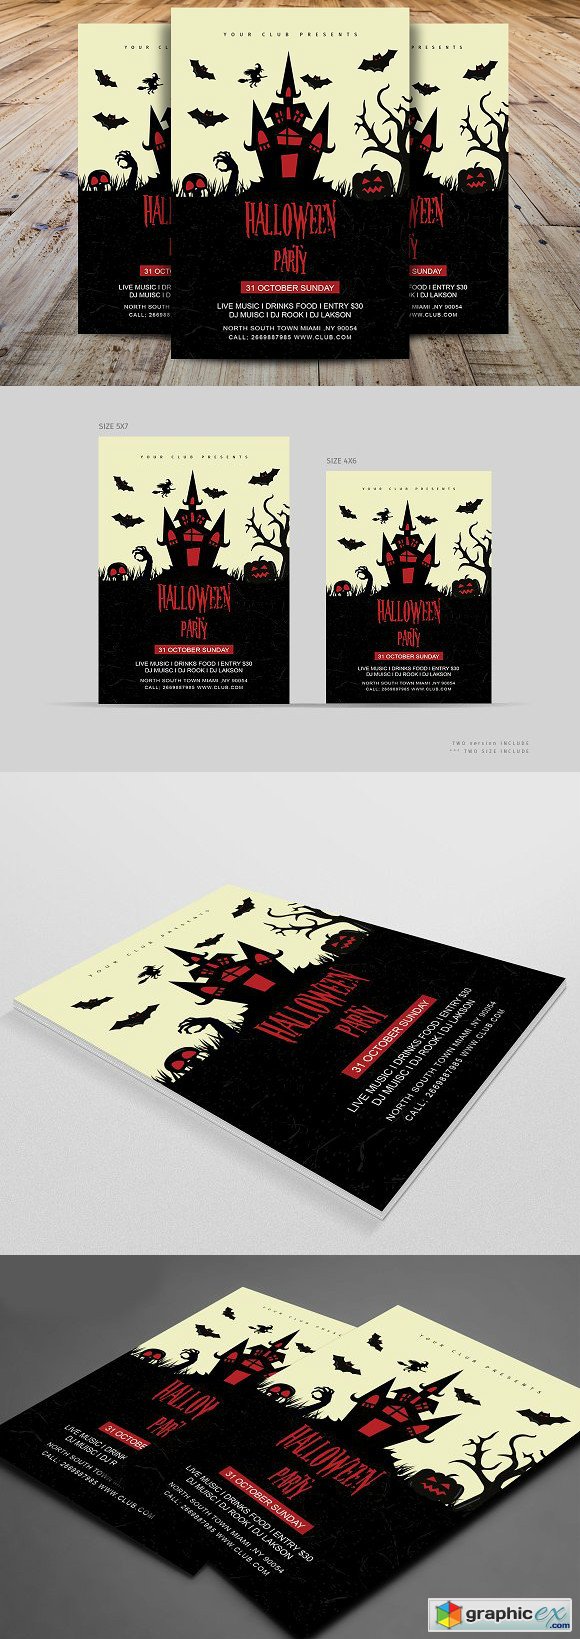 Halloween Party Flyer Template 1918405